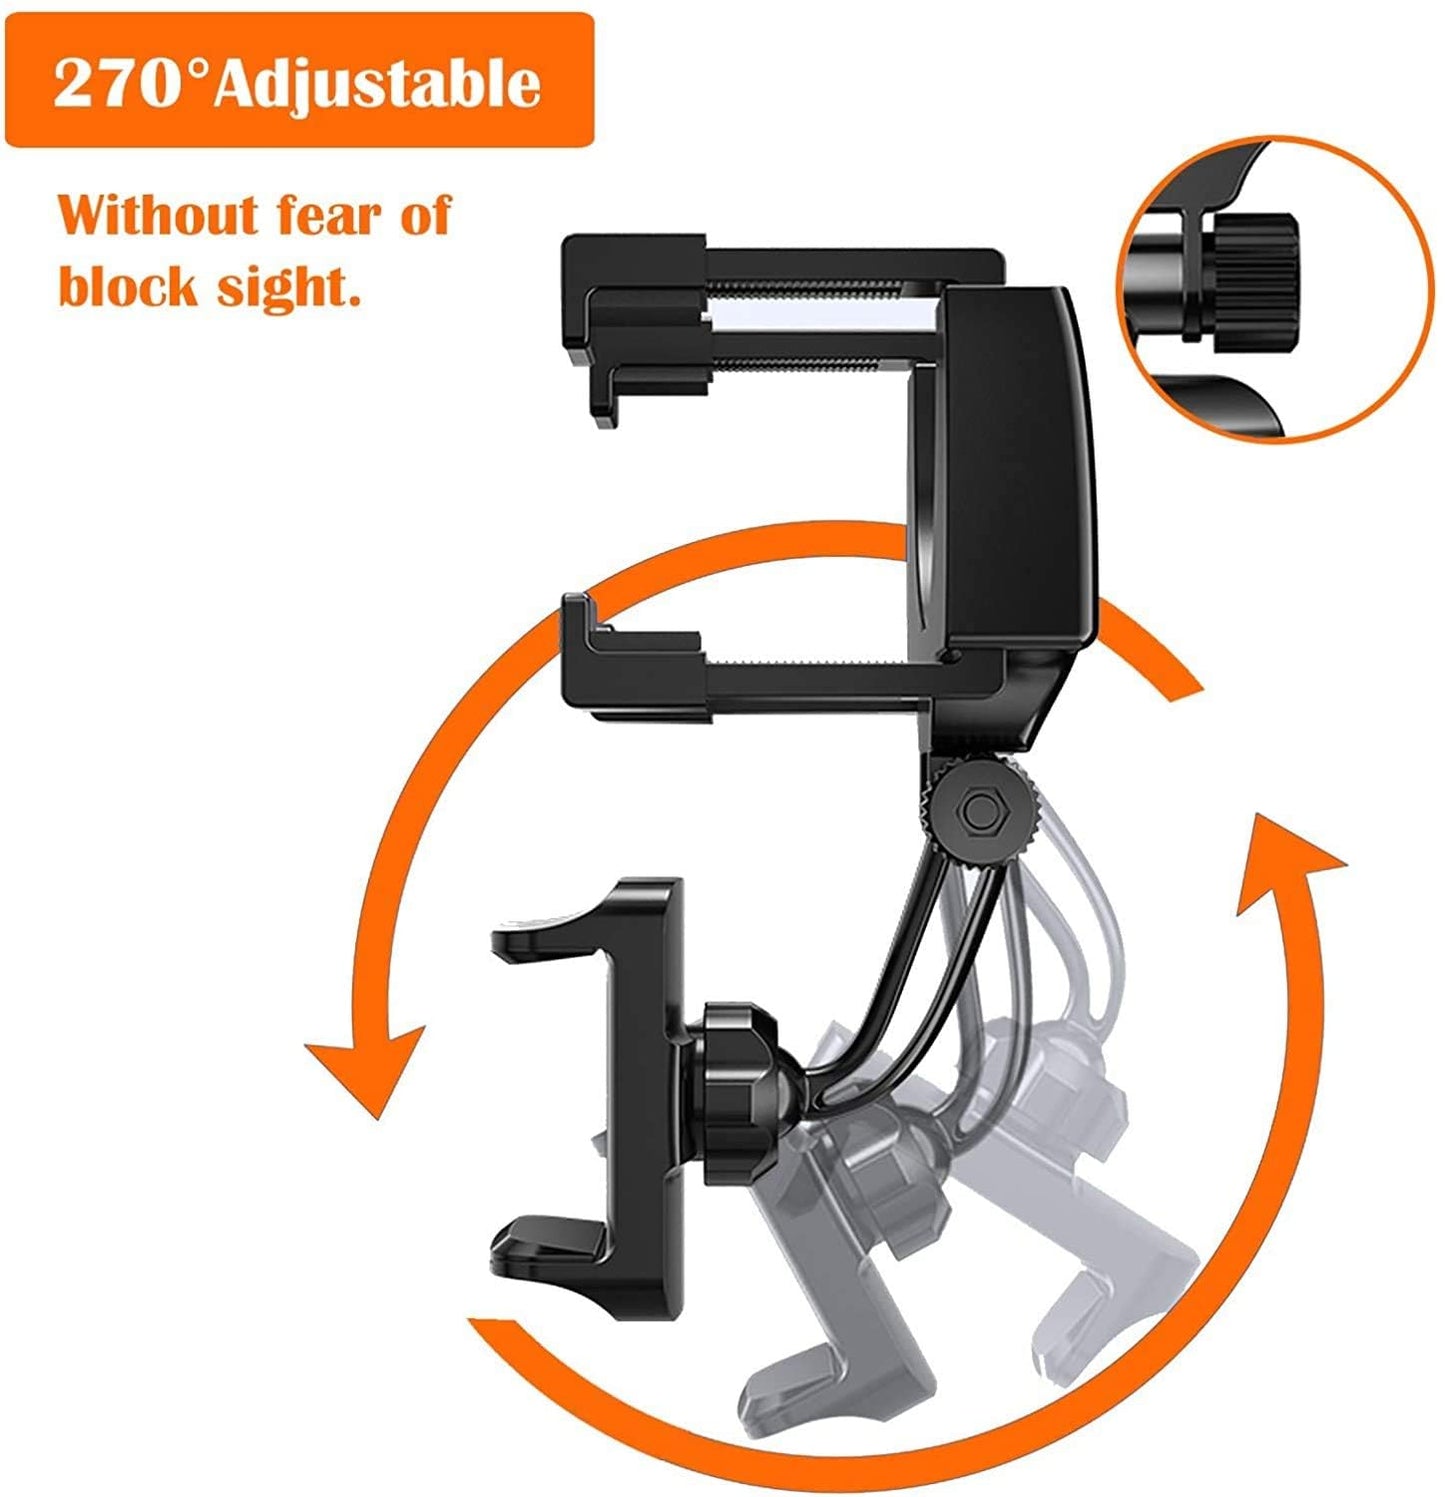 360° Rotatable Adjustable Car Rear View Mirror Mobile Holder Phone Mount (Black)